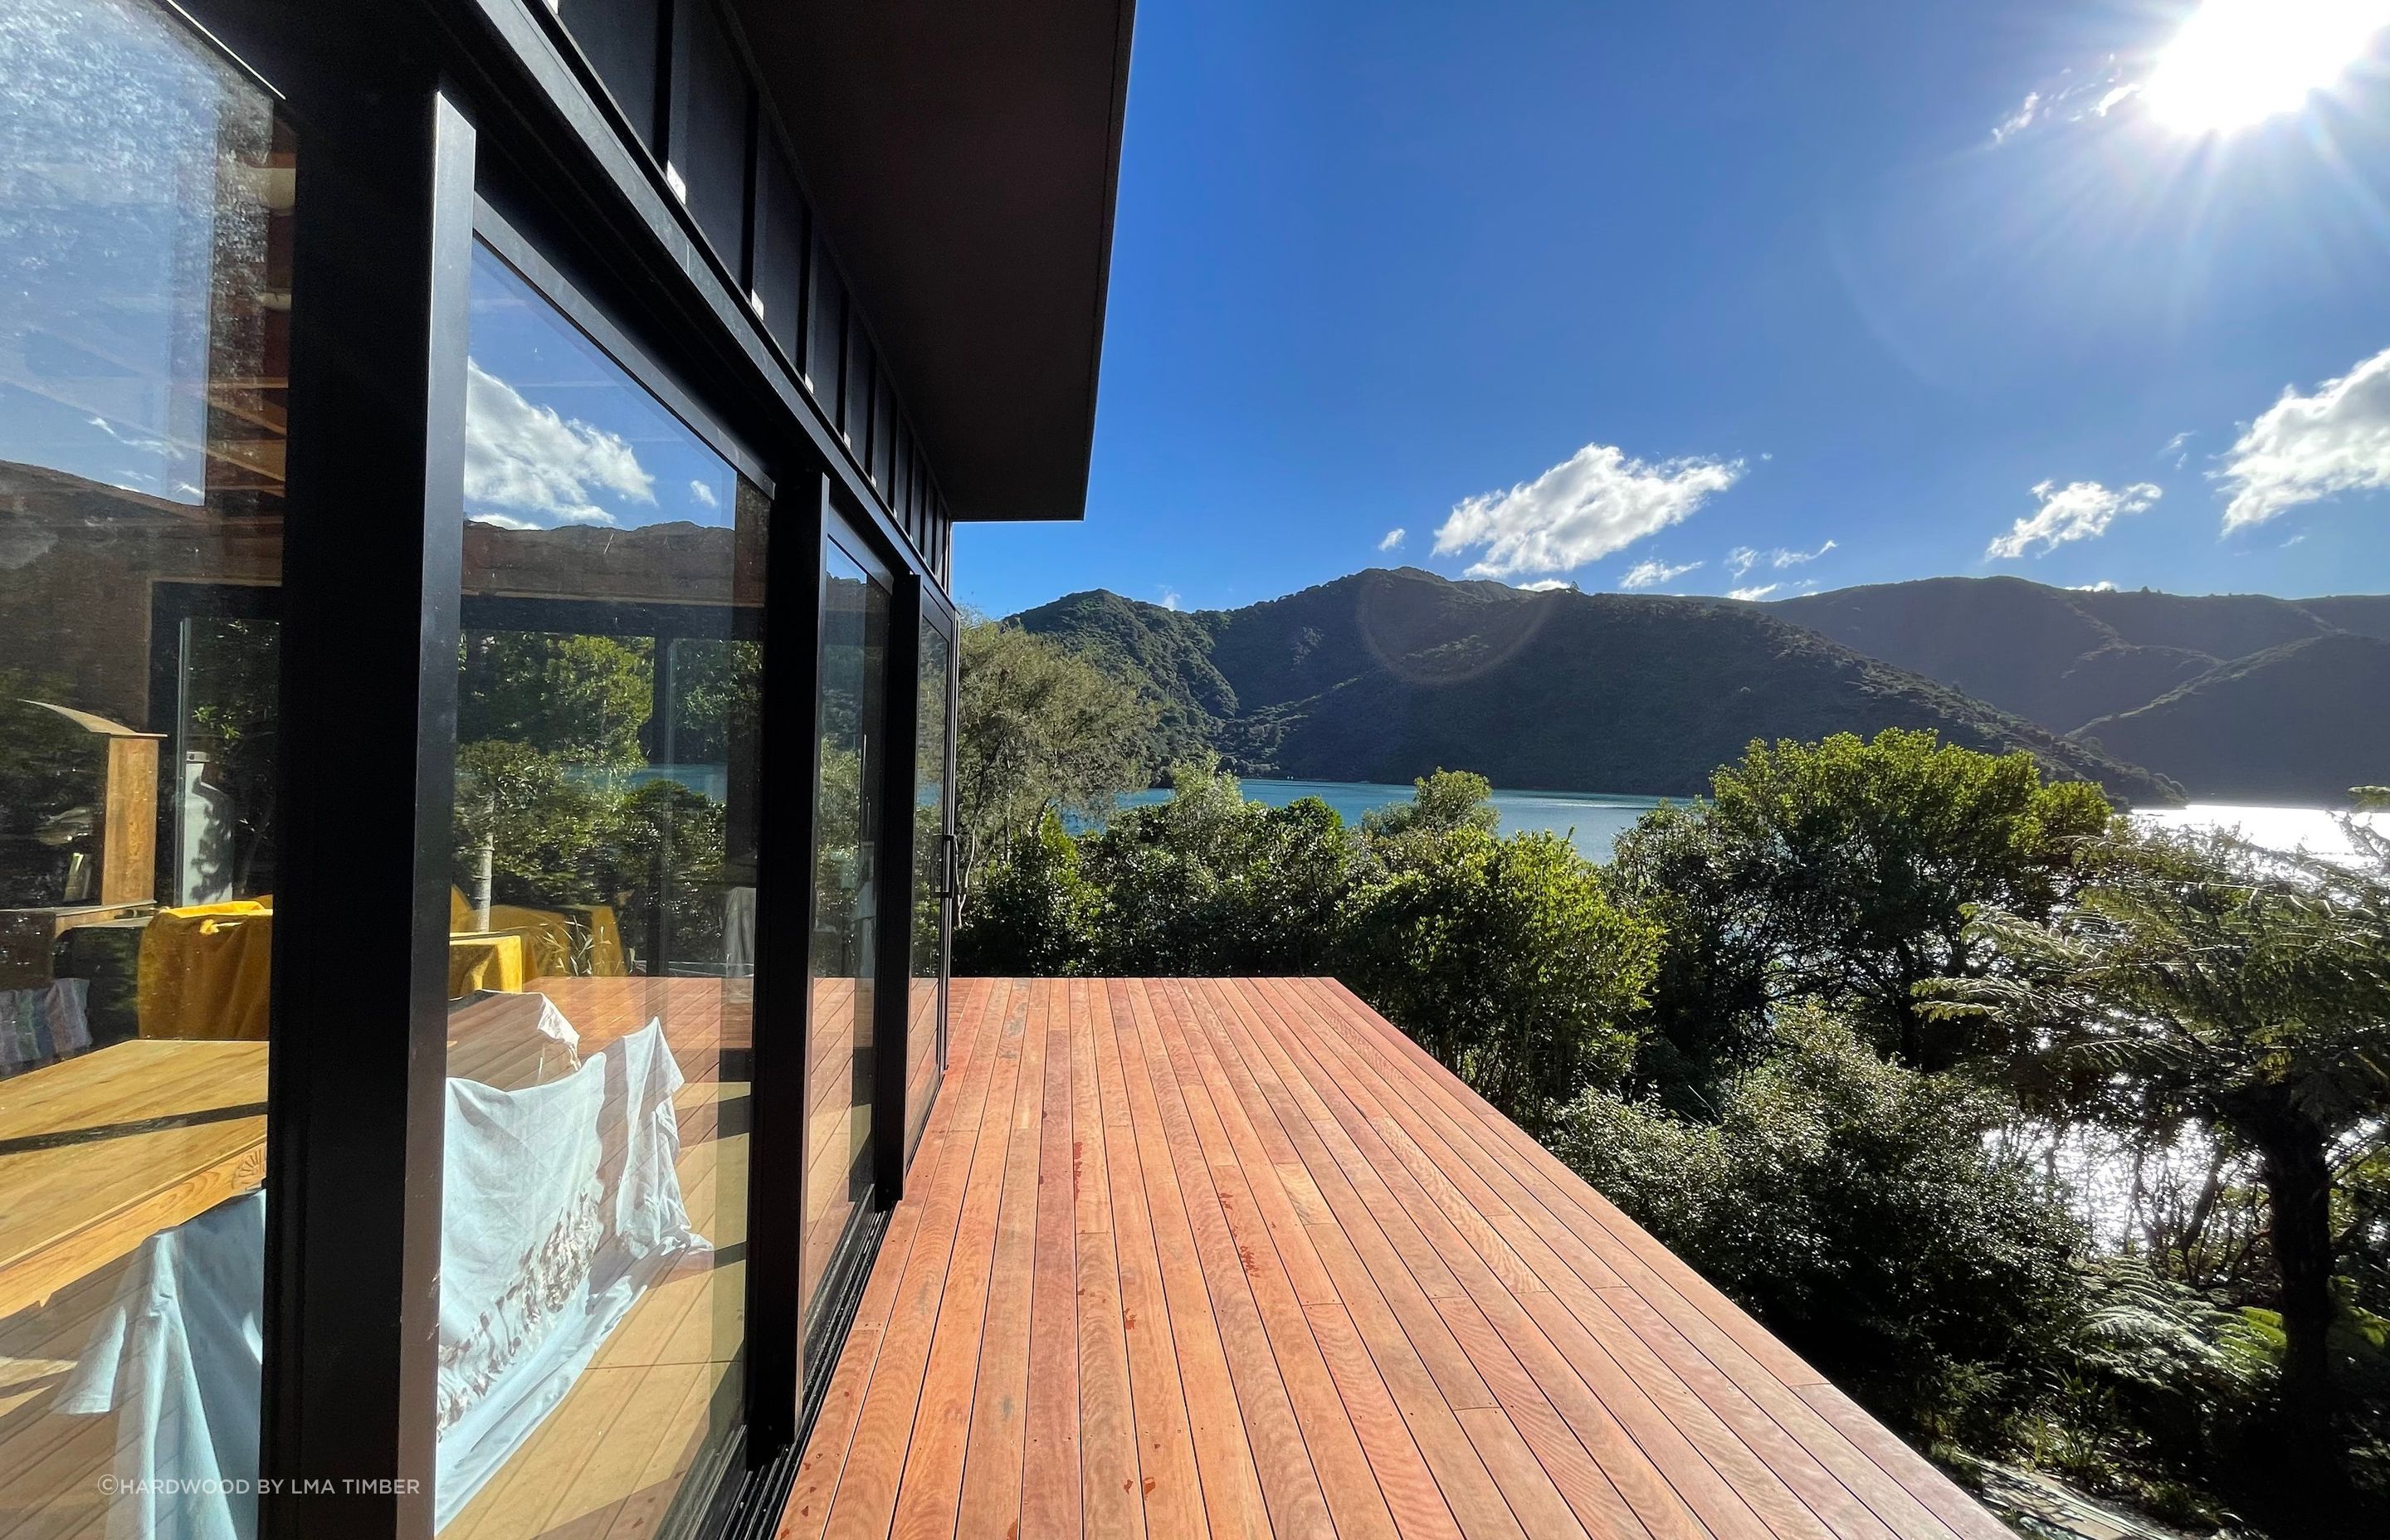 LMA Timber's spotted gum decking is very easy on the eye